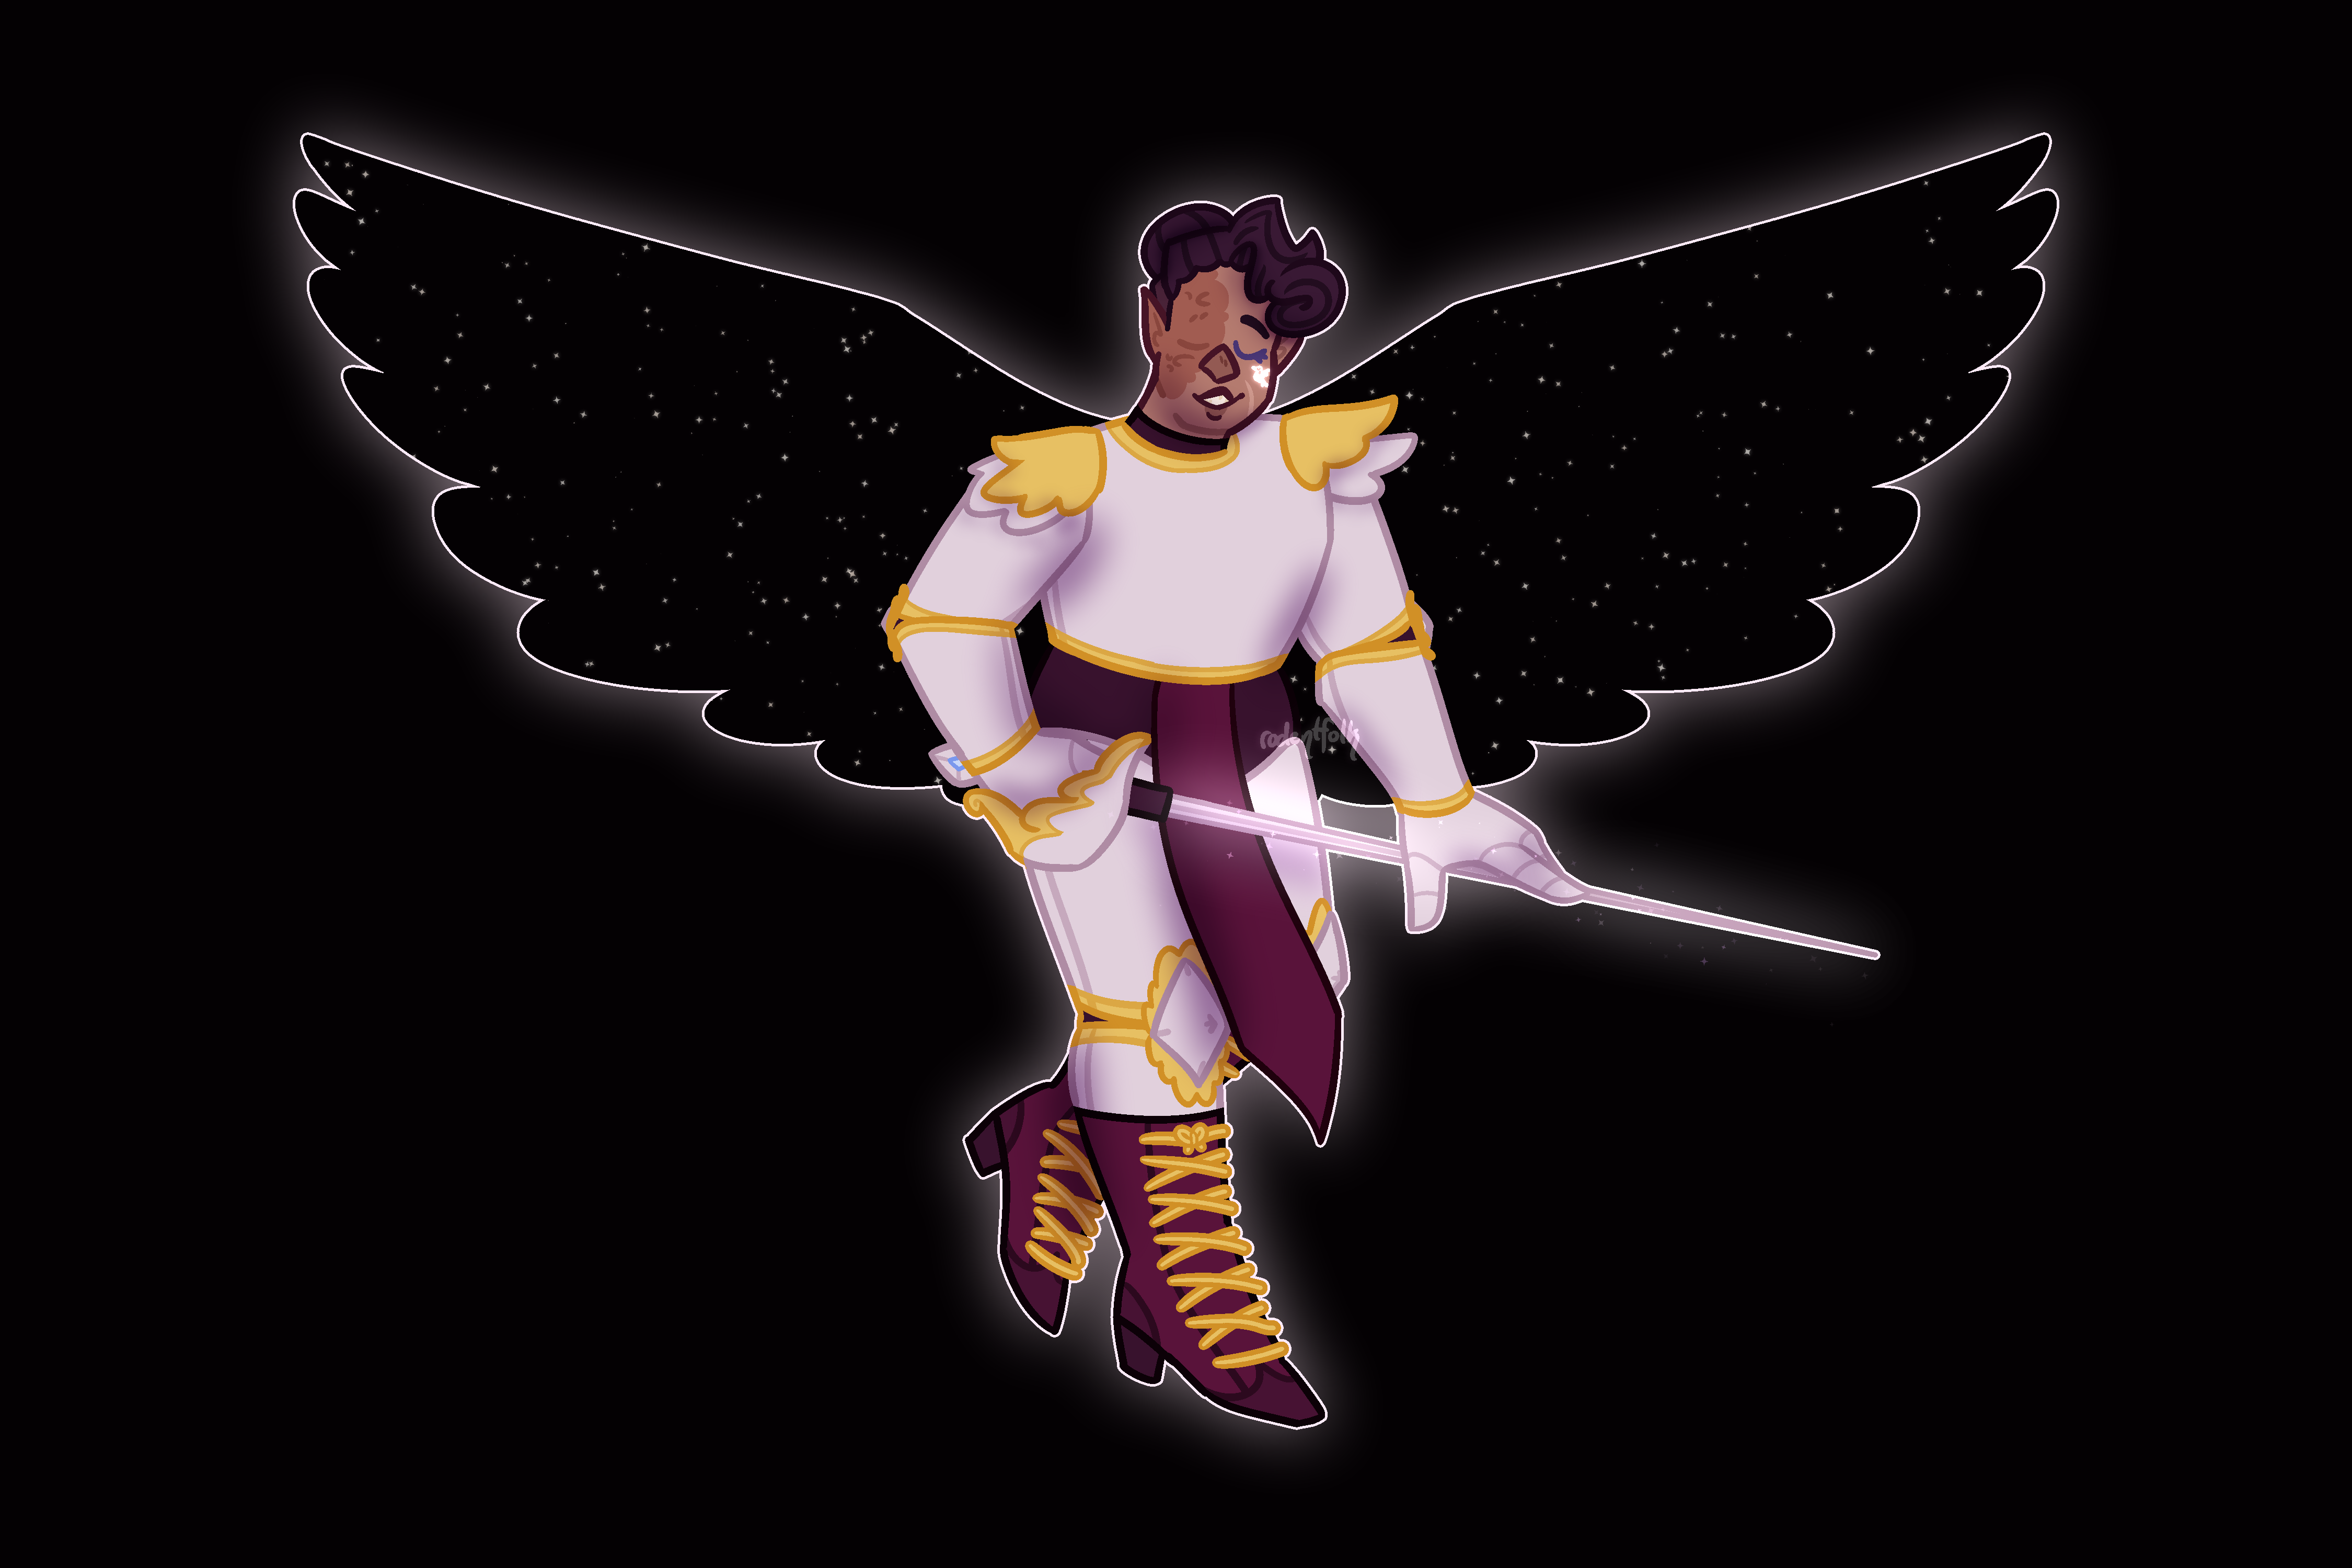 It is a drawing of the artist's character, Nebula. She is dressed in full plate armour with golden decoration on the shoulders and knees. The non-armour parts of her attire are dark magenta. She has a set of large black wings with stars inside them behind her.